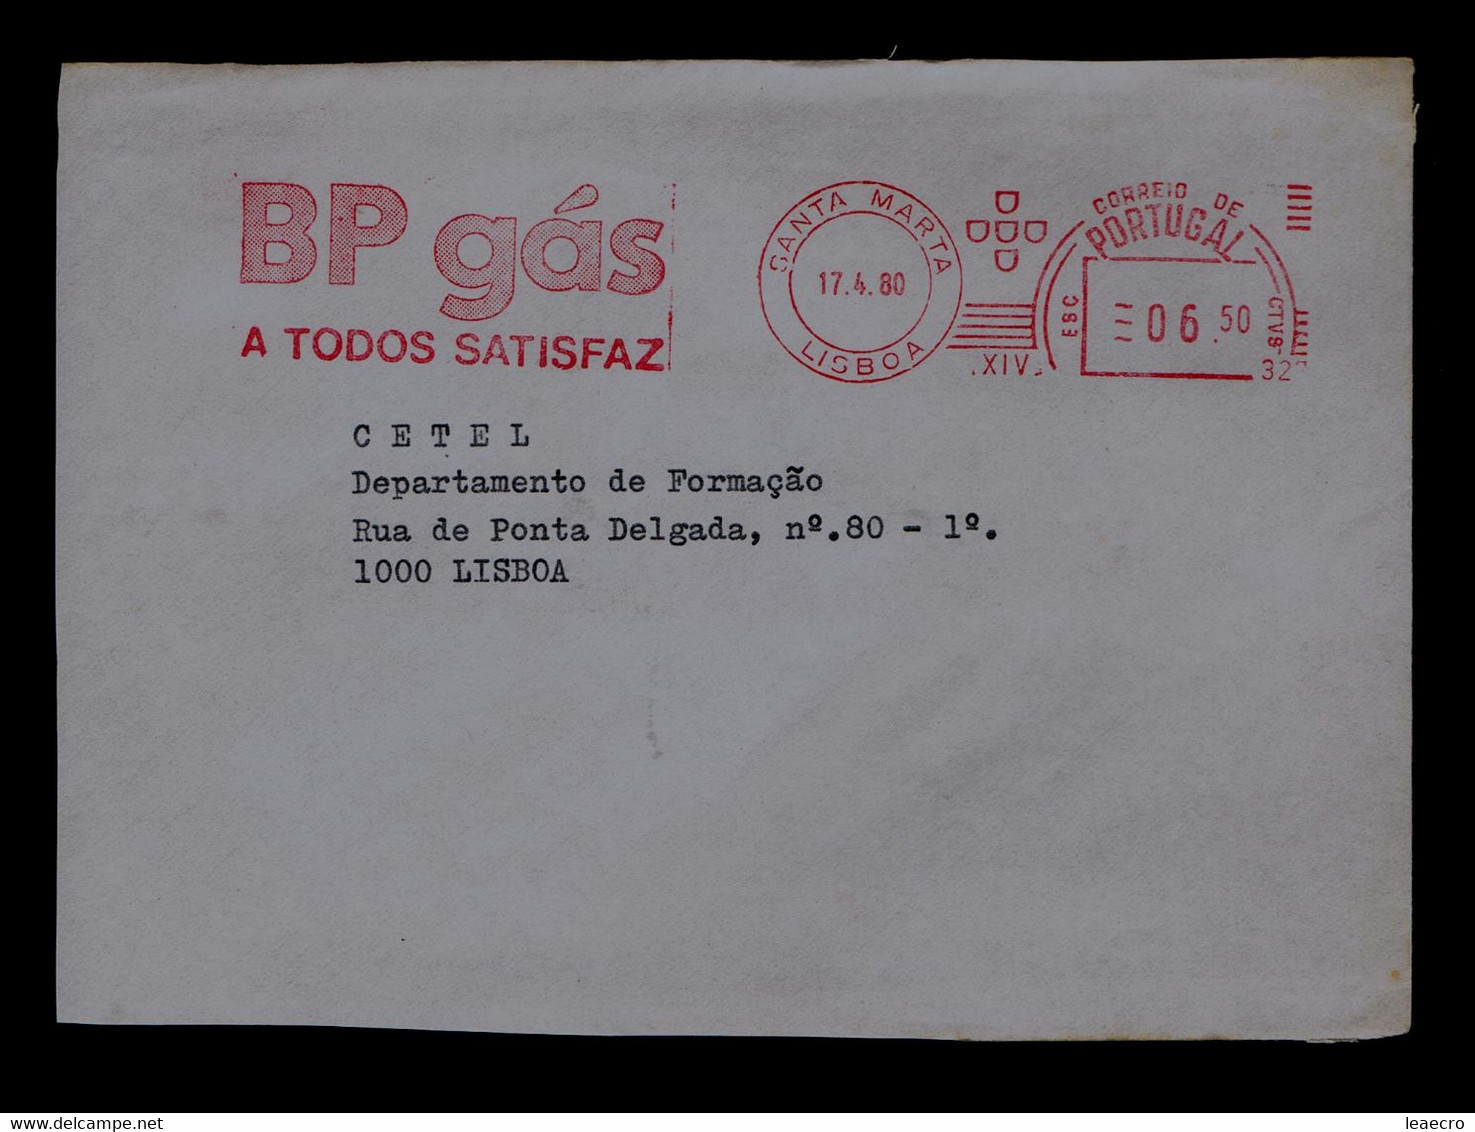 Portugal EMA "BP Gaz - Satisfation To All" Energies Oil Pétrole 1980 Front Cover Gc5298 - Gaz